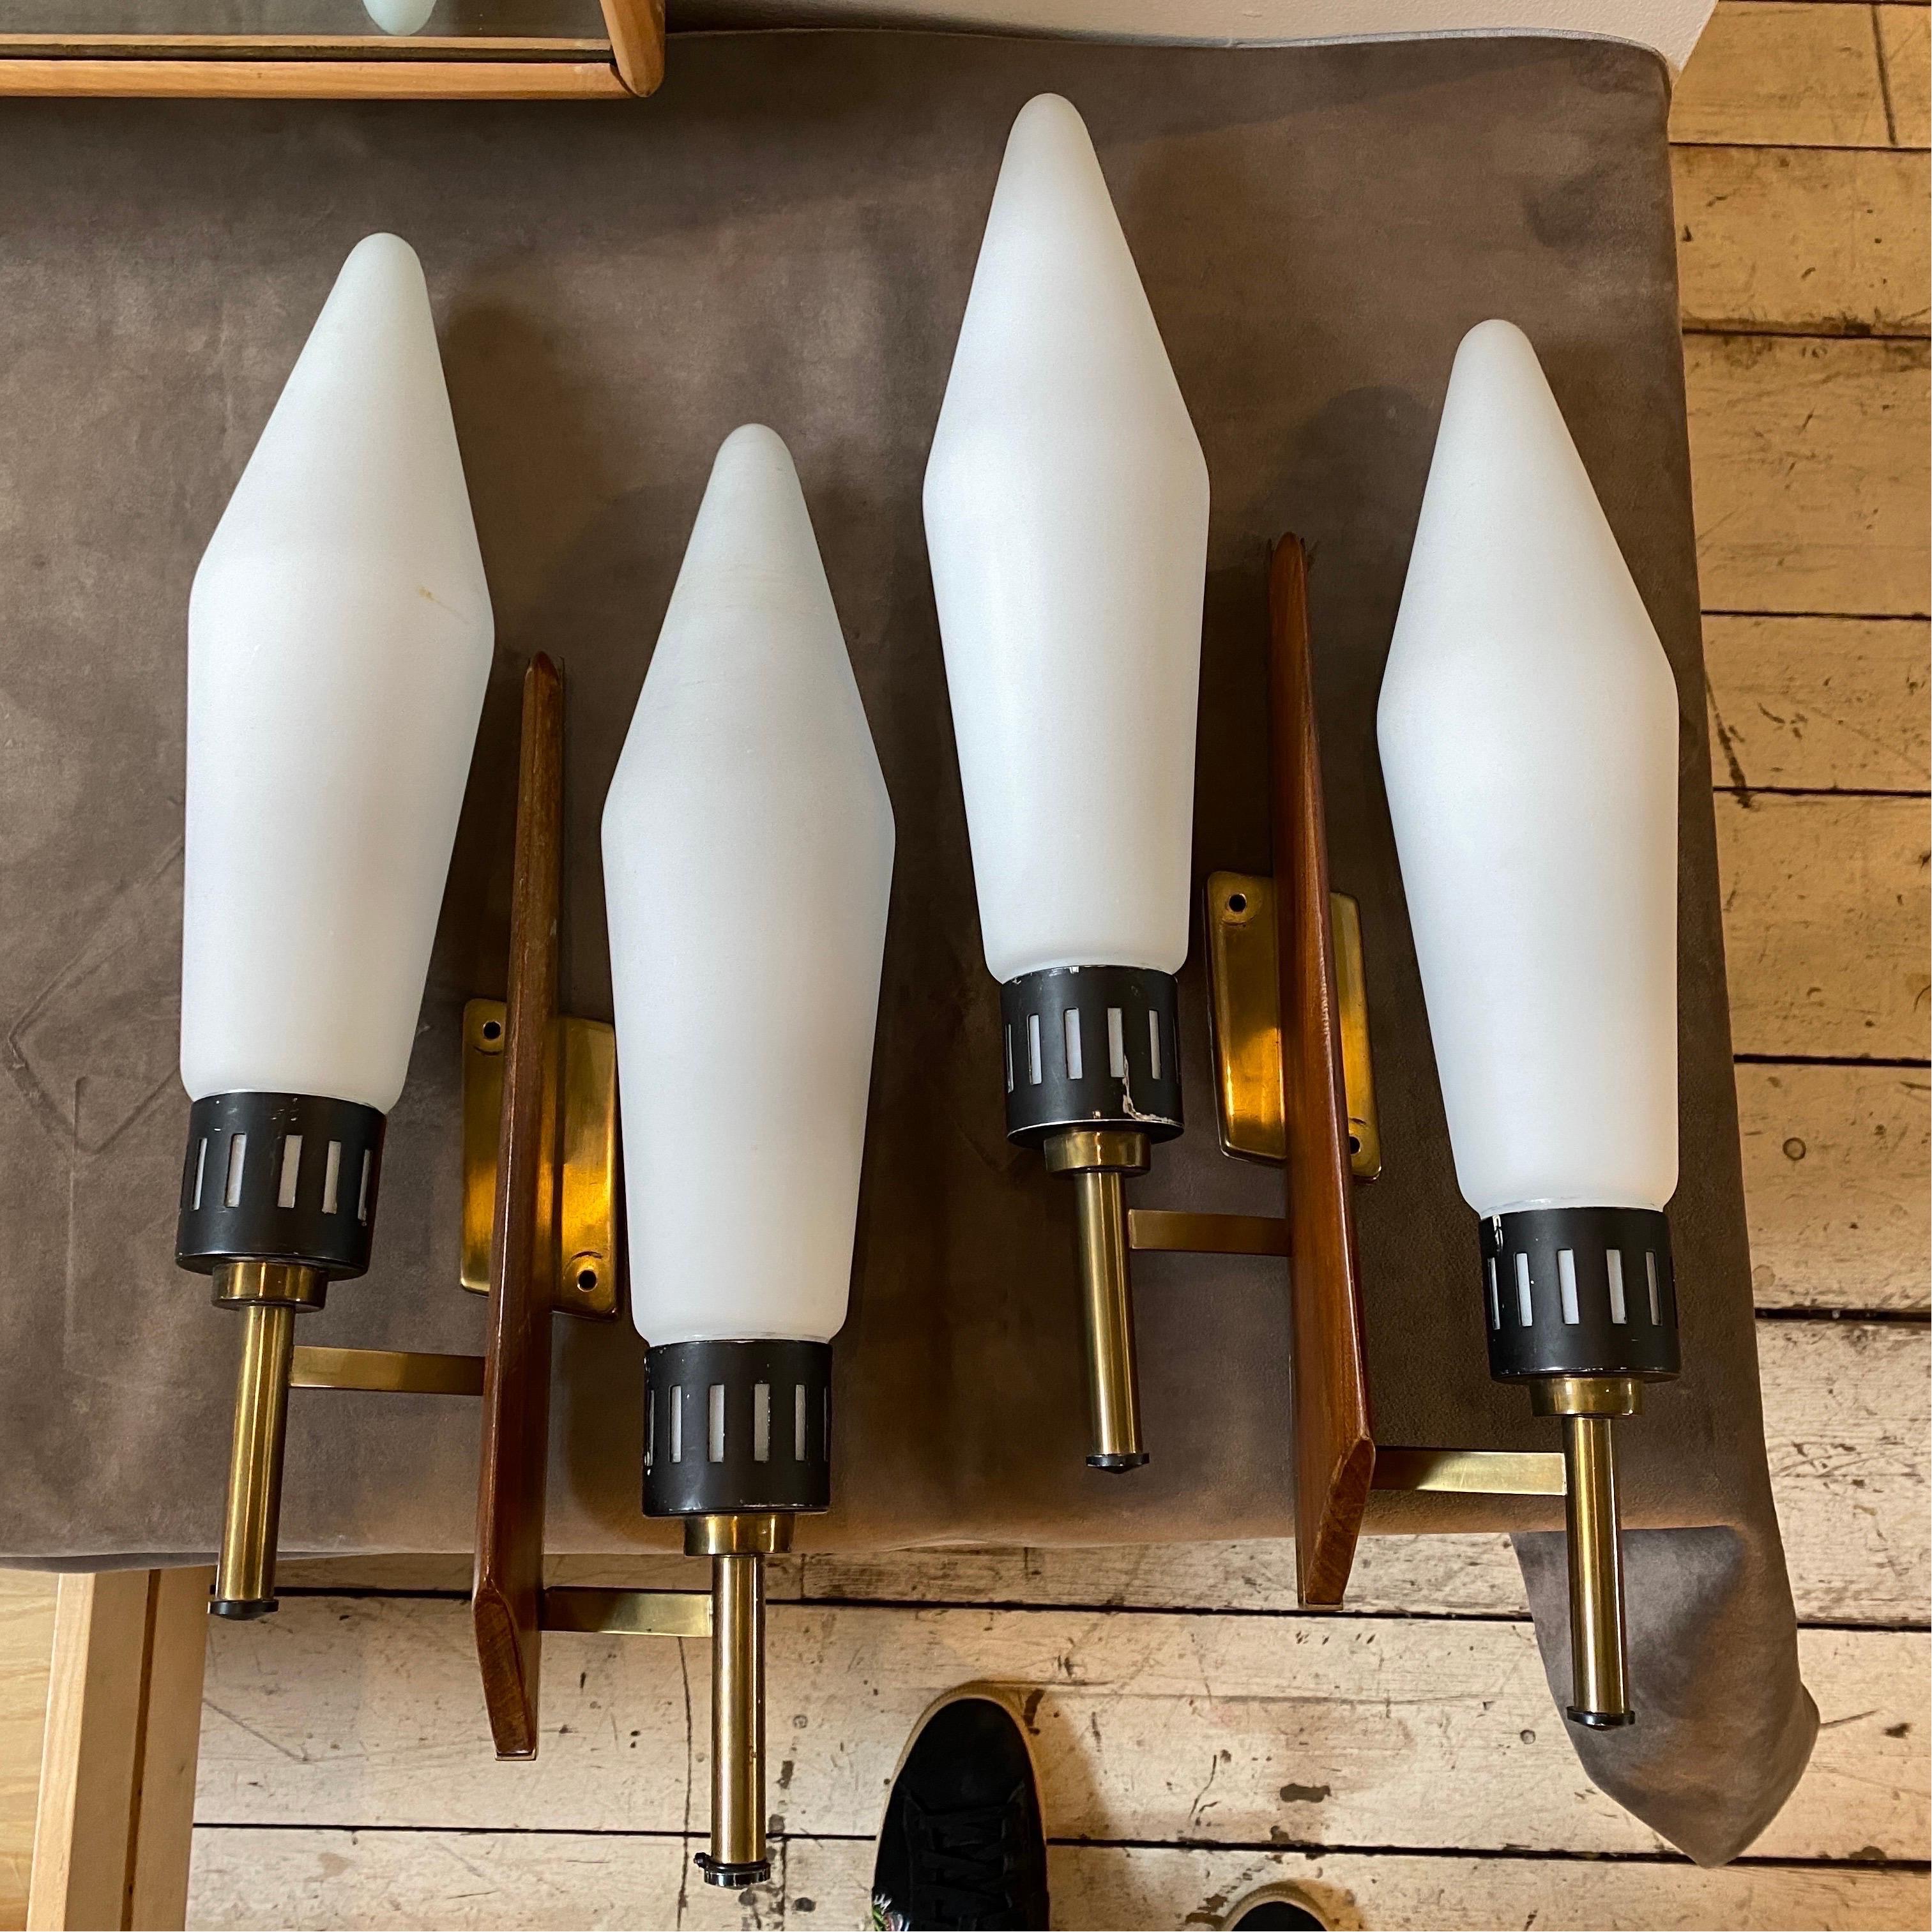 Two amazing brass, teak and white glass wall sconces made in Italy in the Sixties, high quality brass parts, extremely rare glasses and lovely teak shape gives them a superb look. Their large size also gives the function of furnishing the wall as